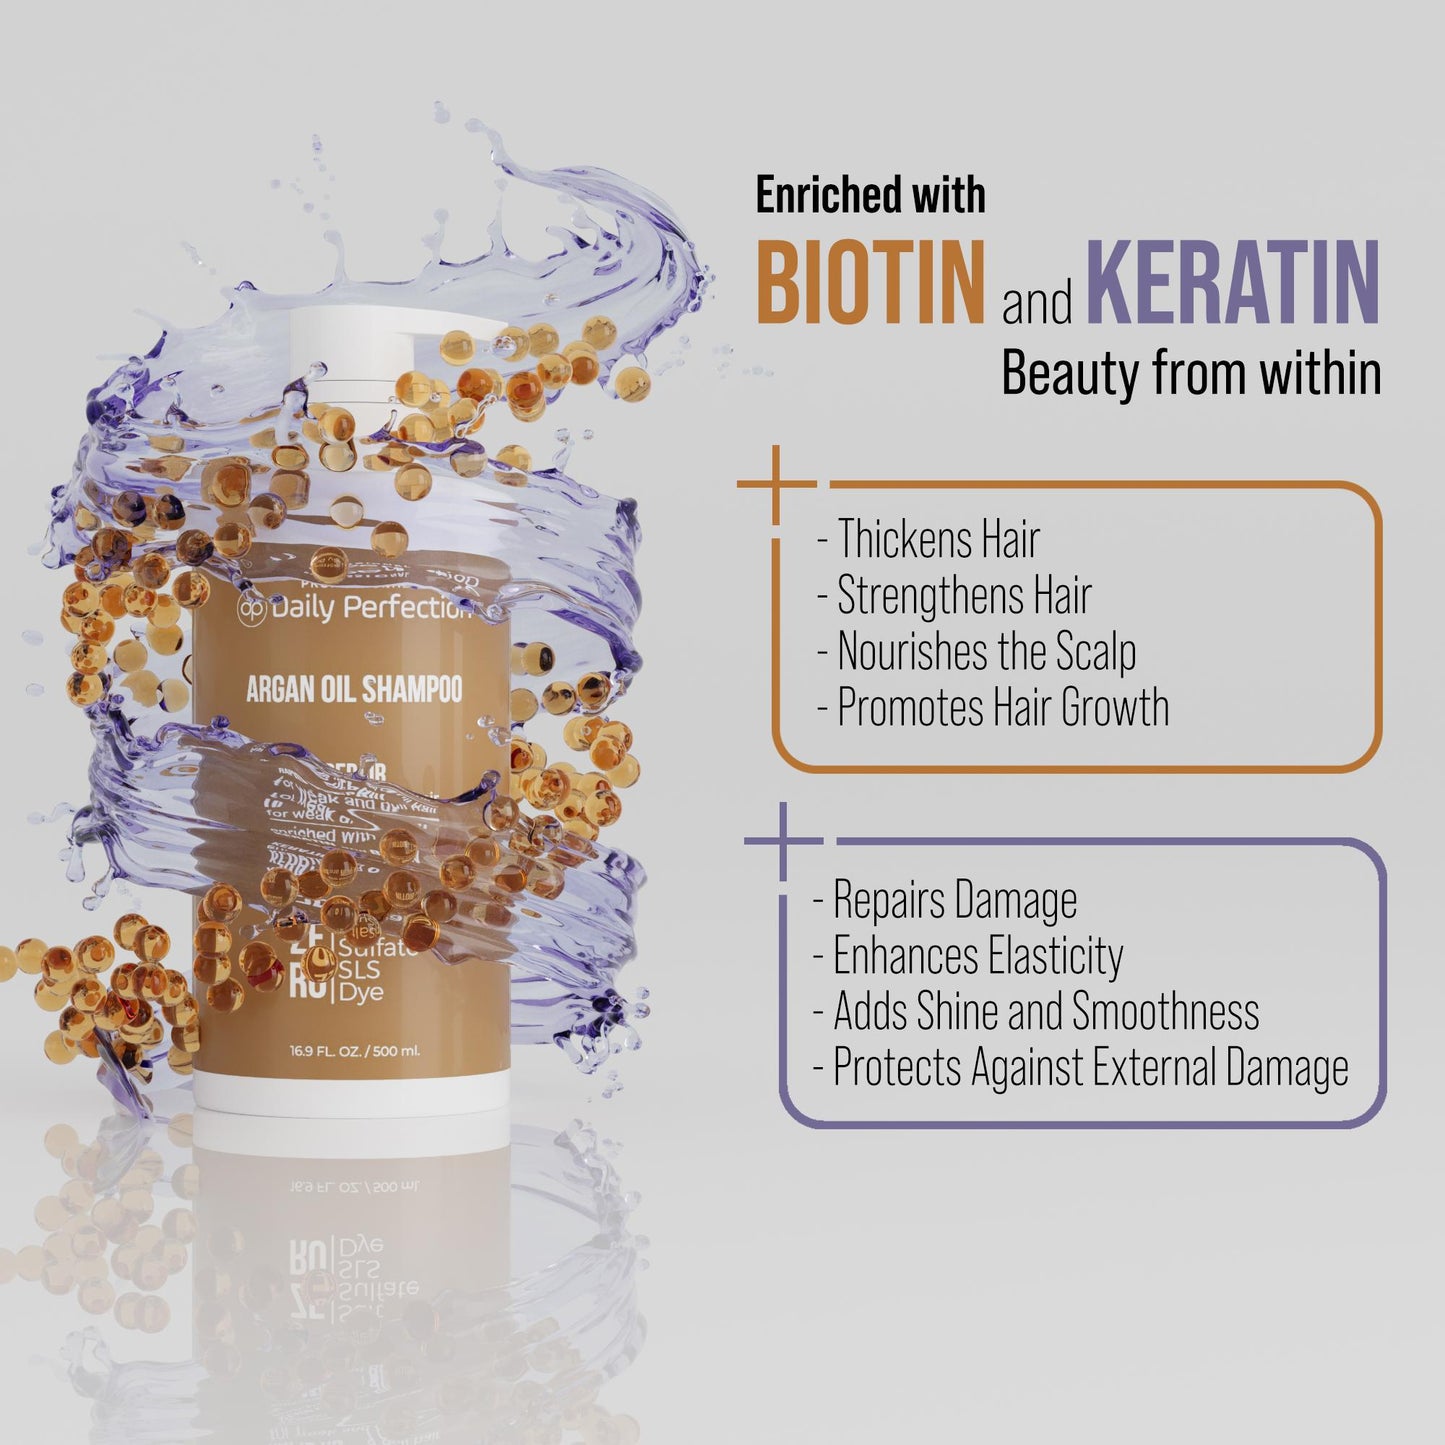 infographic explains the benefits of biotin and kertain boosts which are used in Daily Perfection Argan Oil Shampoo